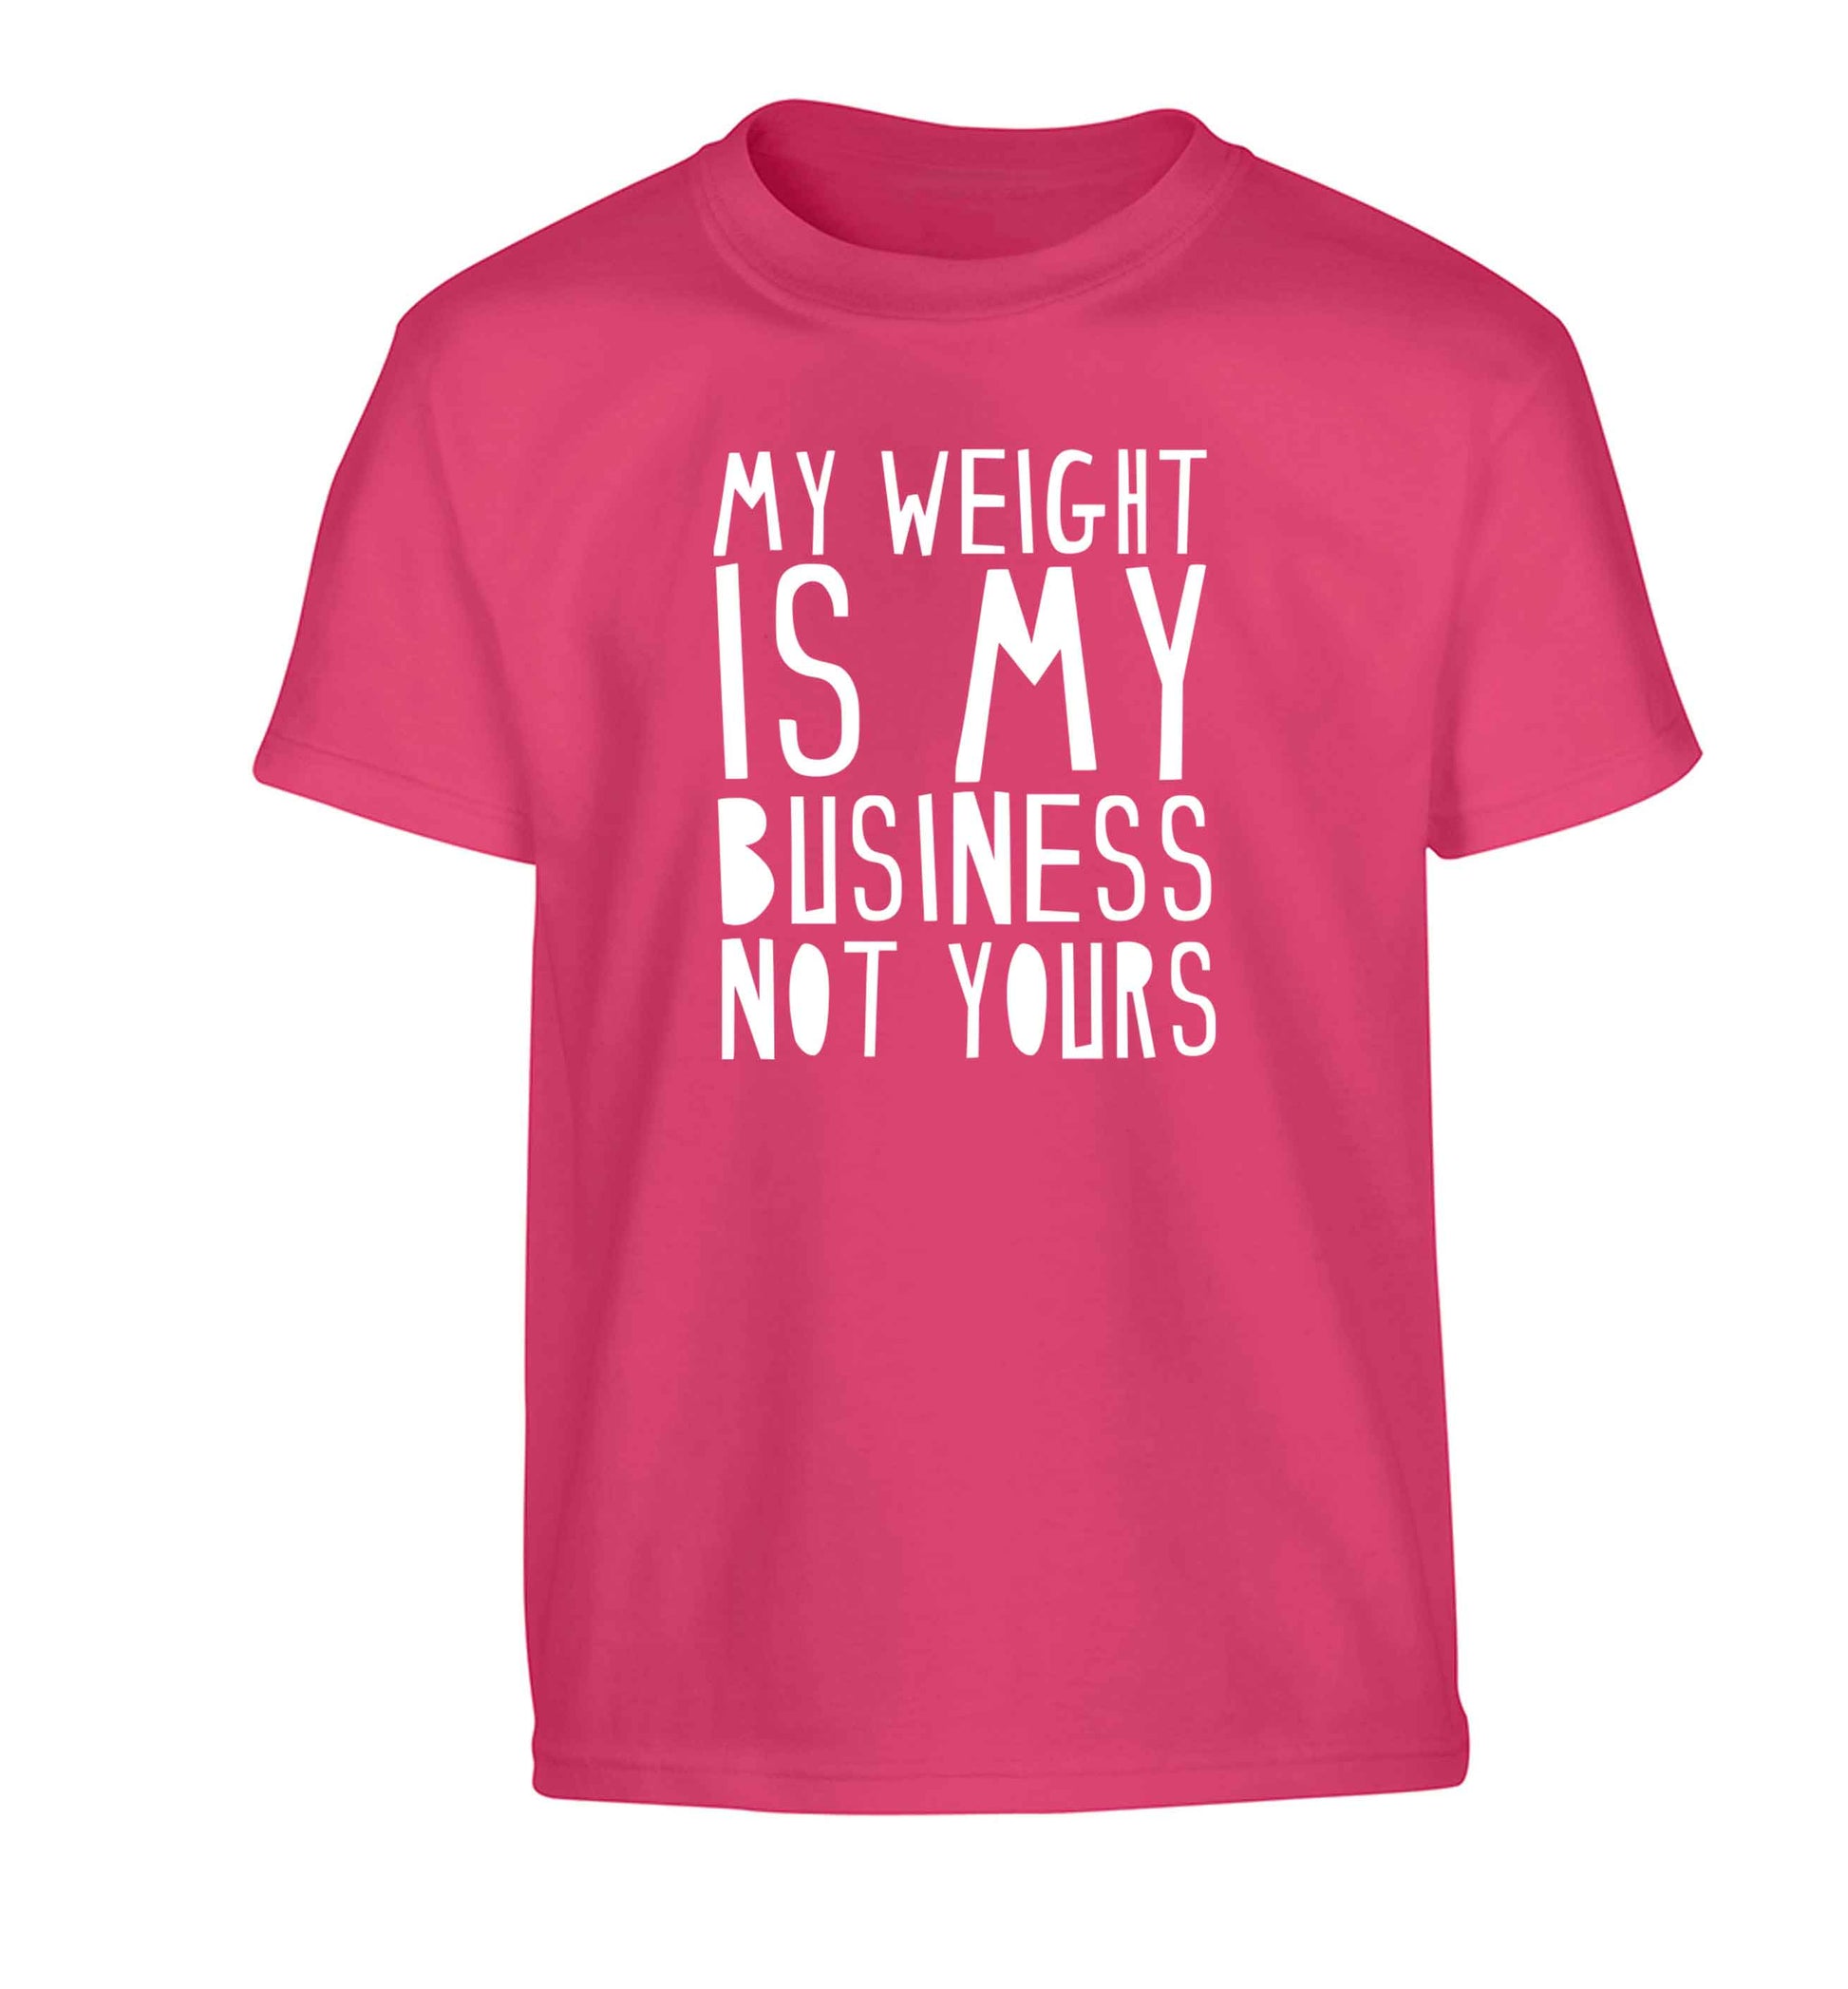 My weight is my business not yours Children's pink Tshirt 12-13 Years